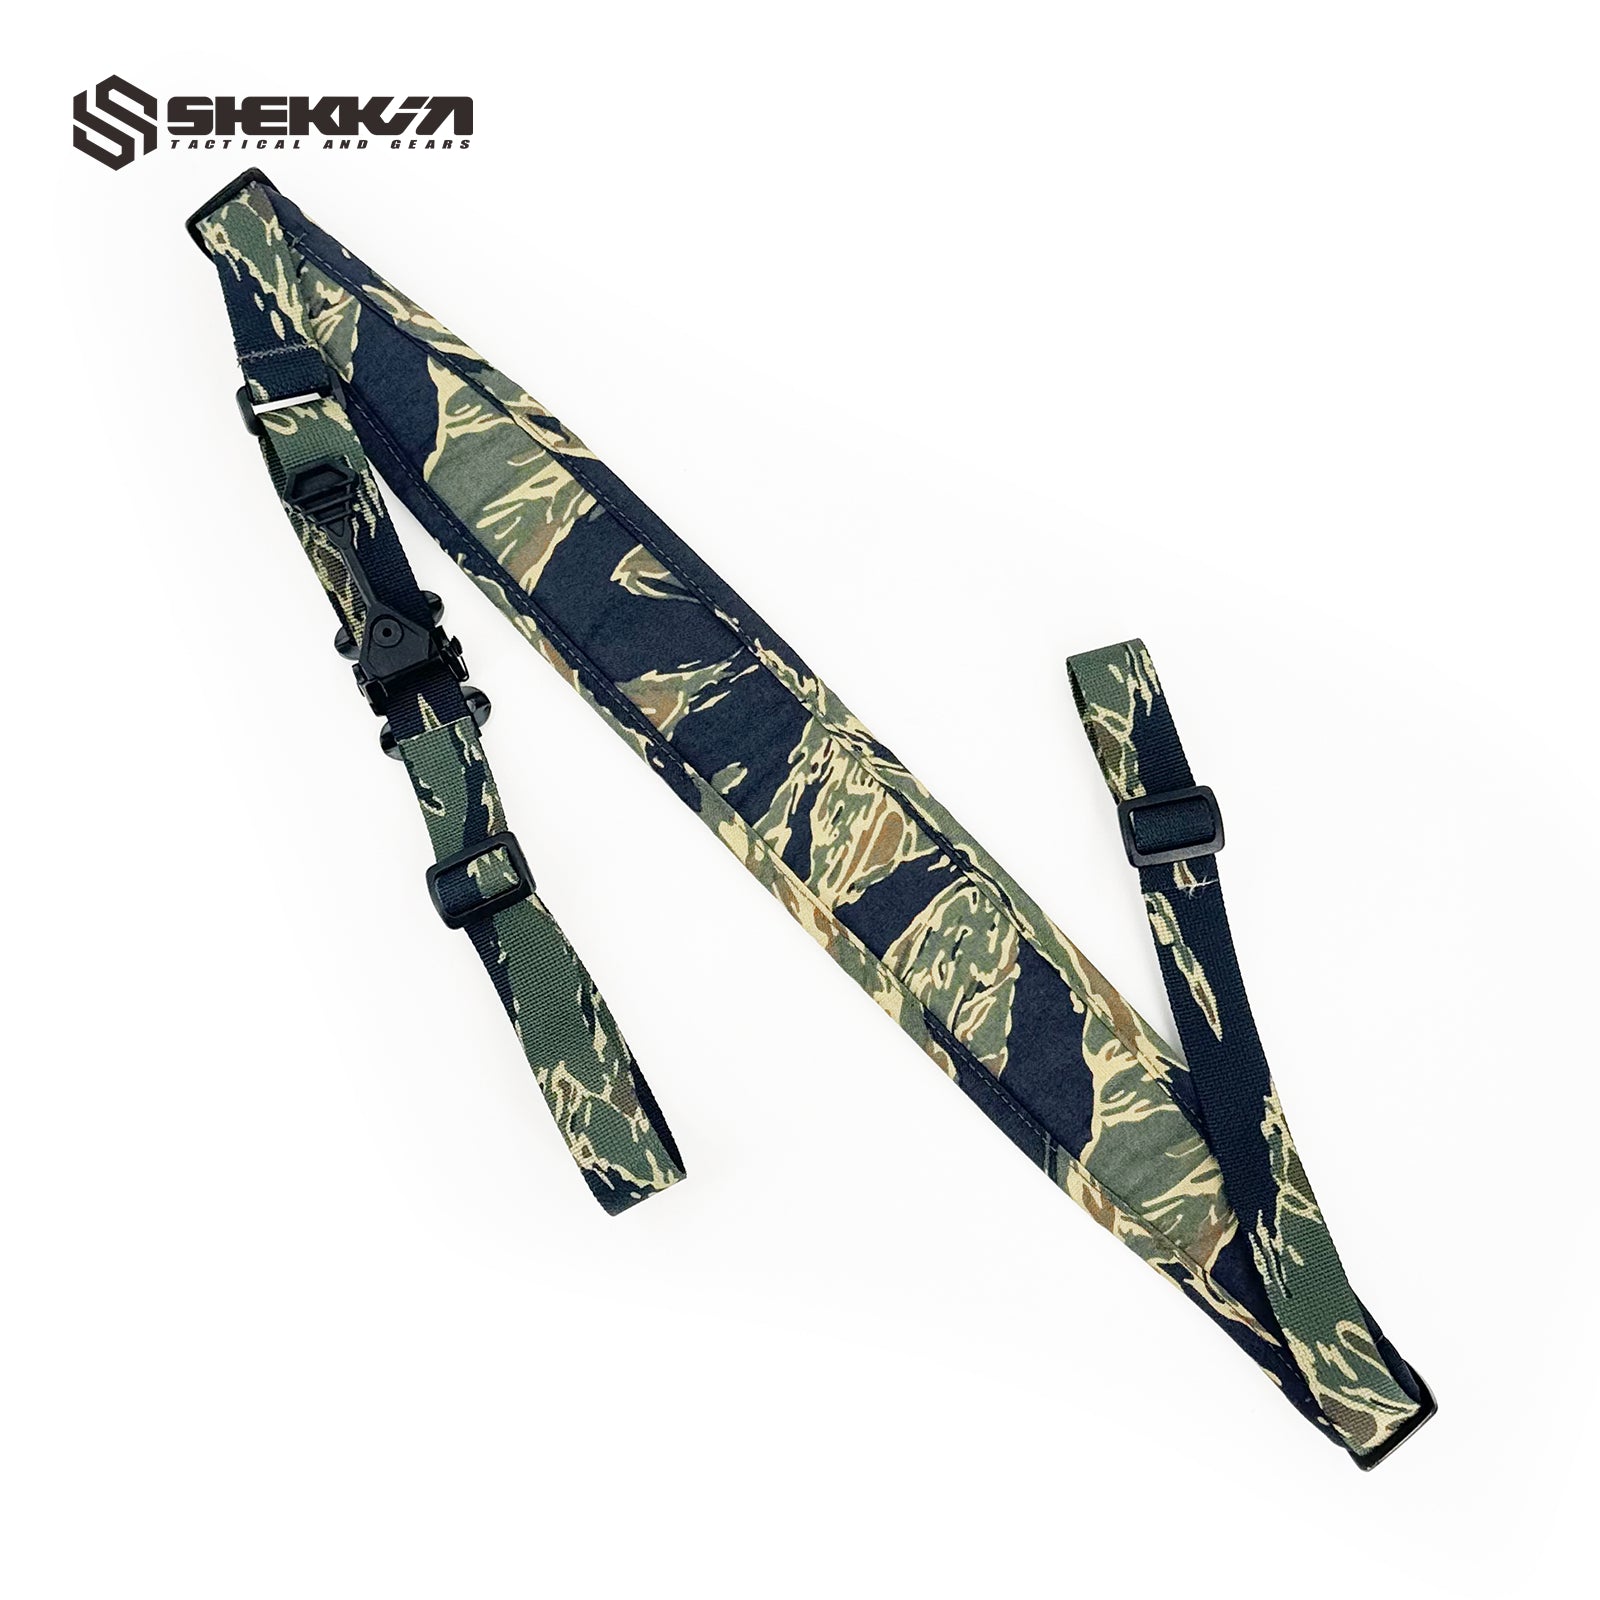 Slingster style two point tactical sling